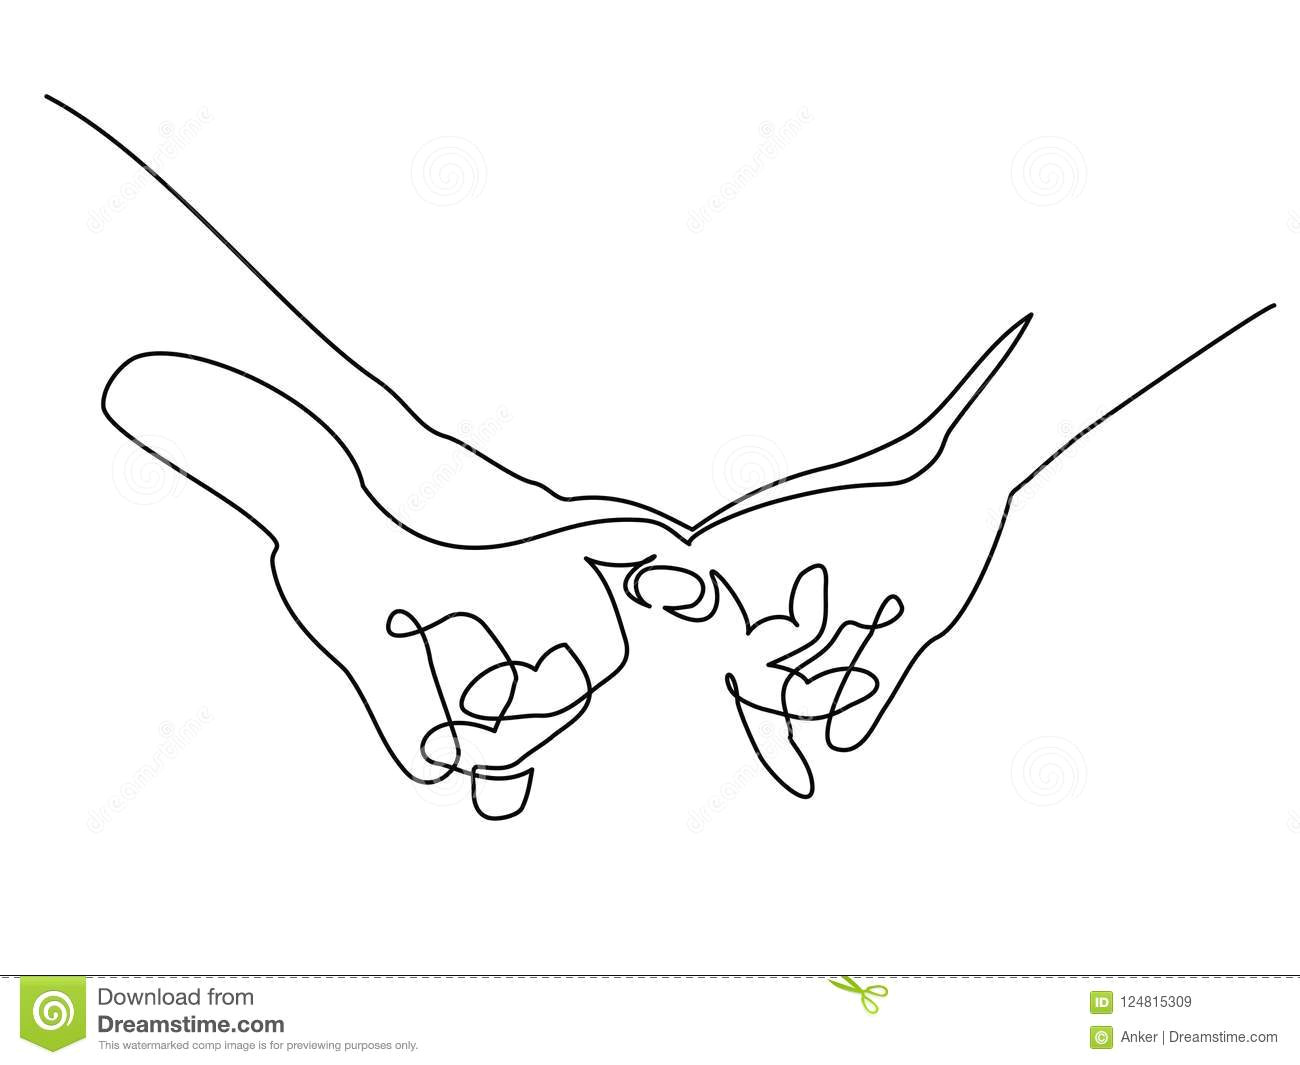 Drawings Of Hands and Fingers Hands Woman and Man Holding together with Fingers Stock Vector